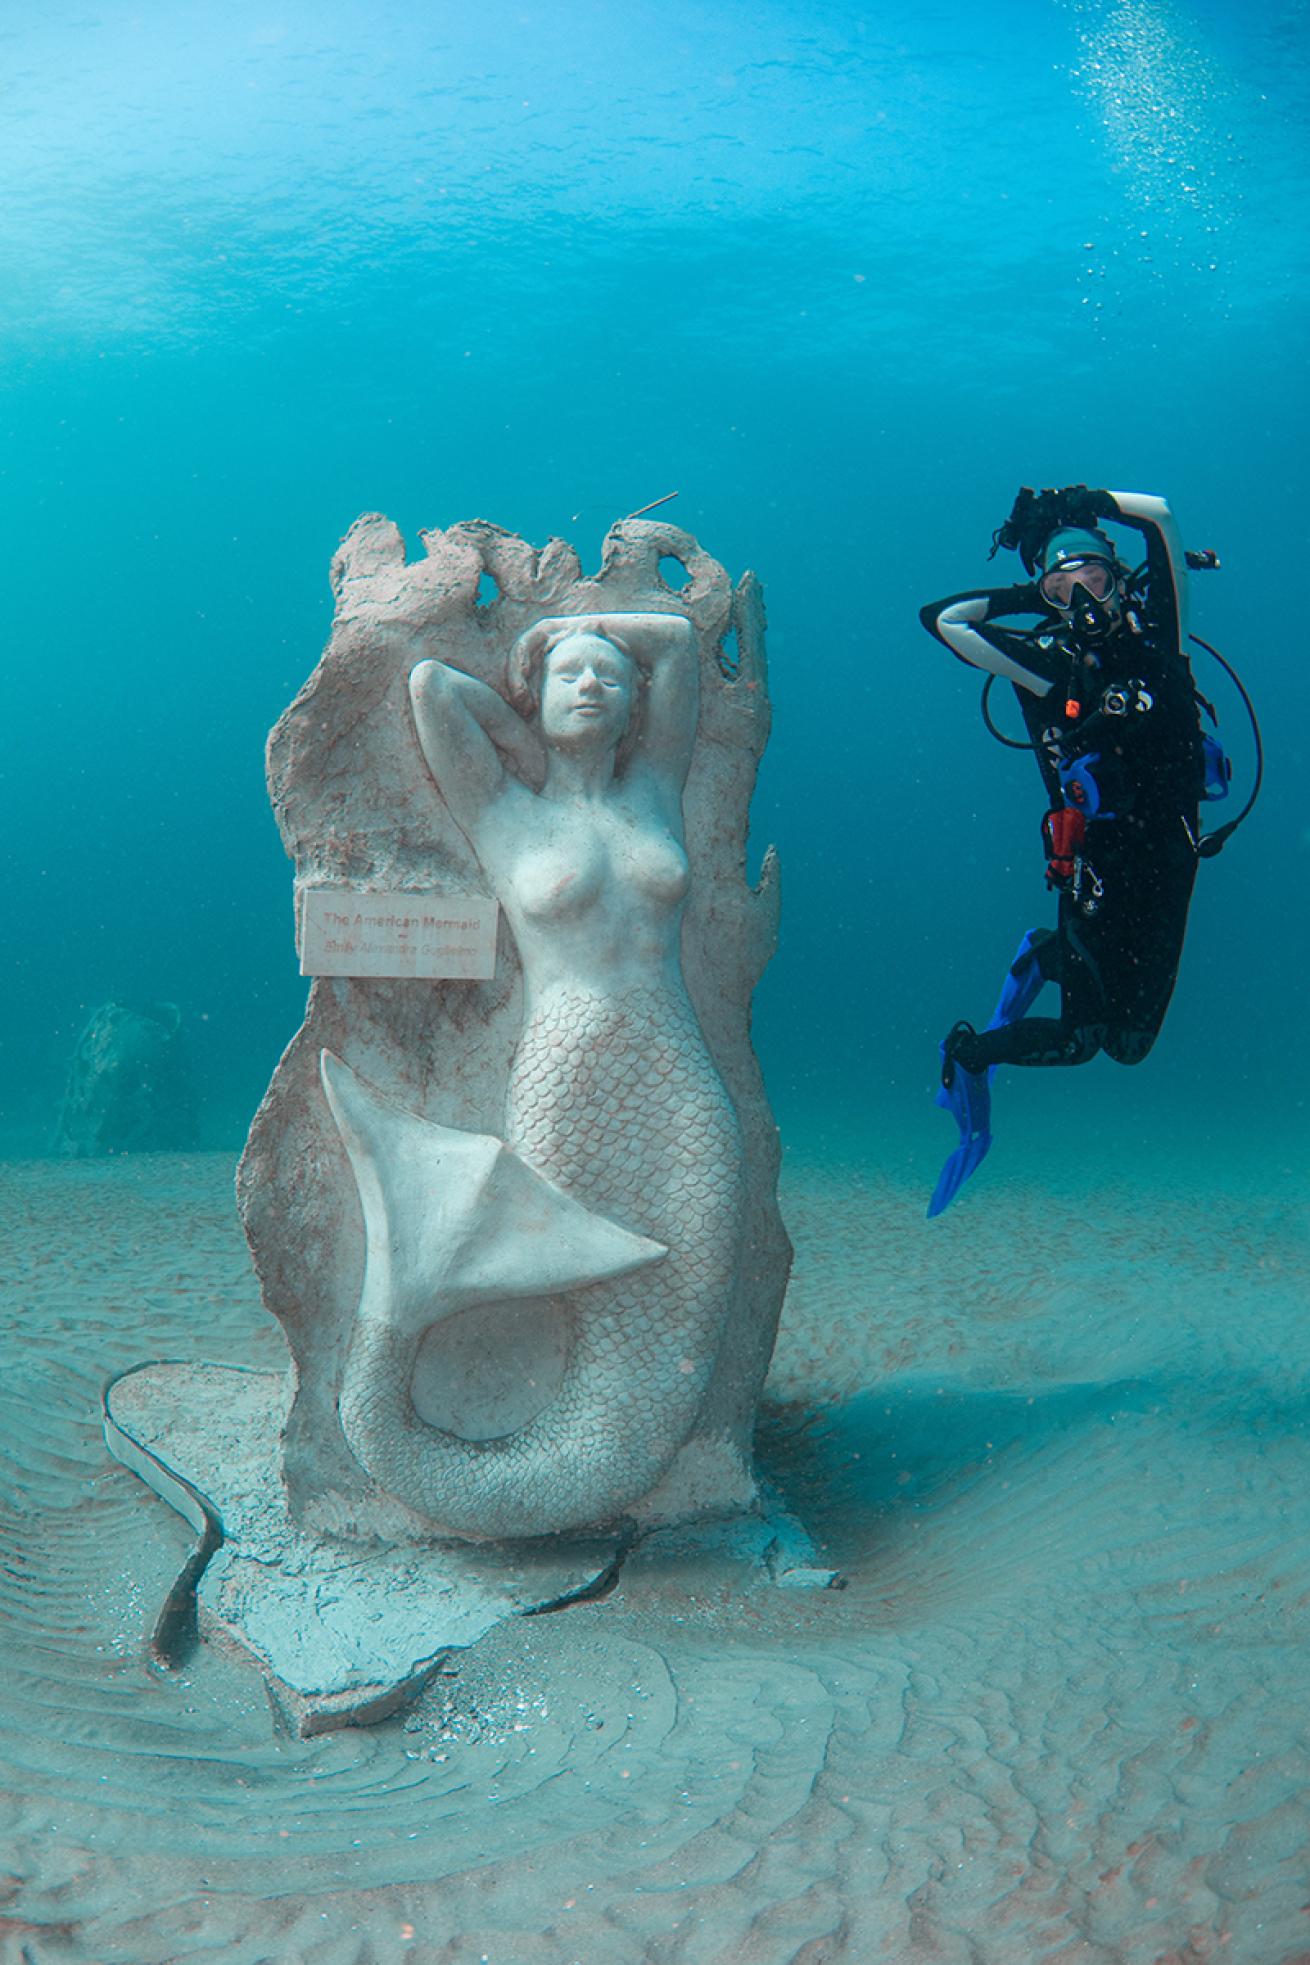 A diver poses next to an underwater mermaid statue